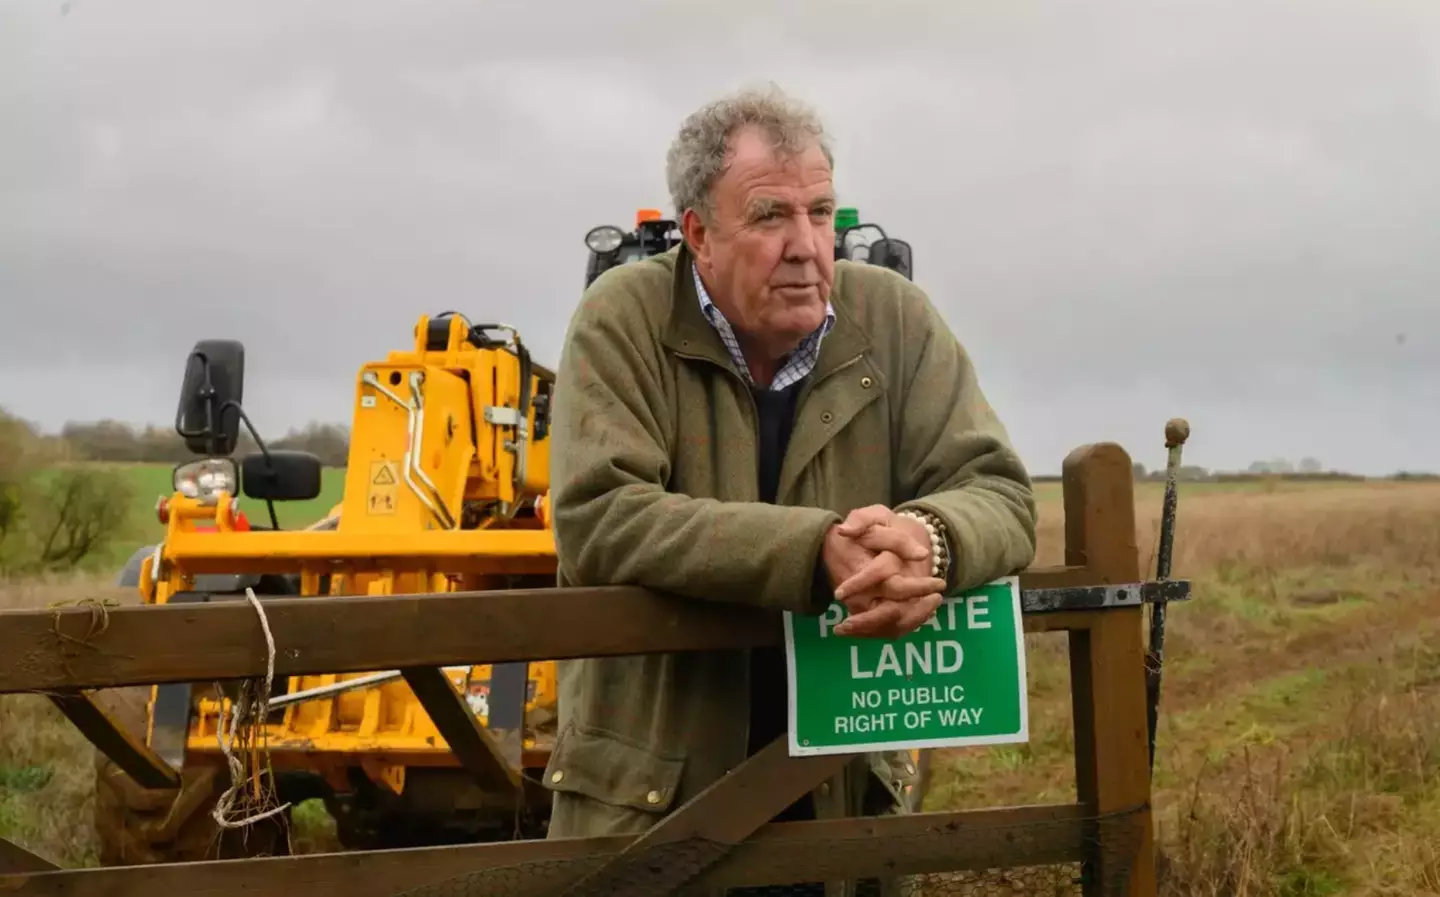 Clarkson says that even his own dogs will chase a deer.